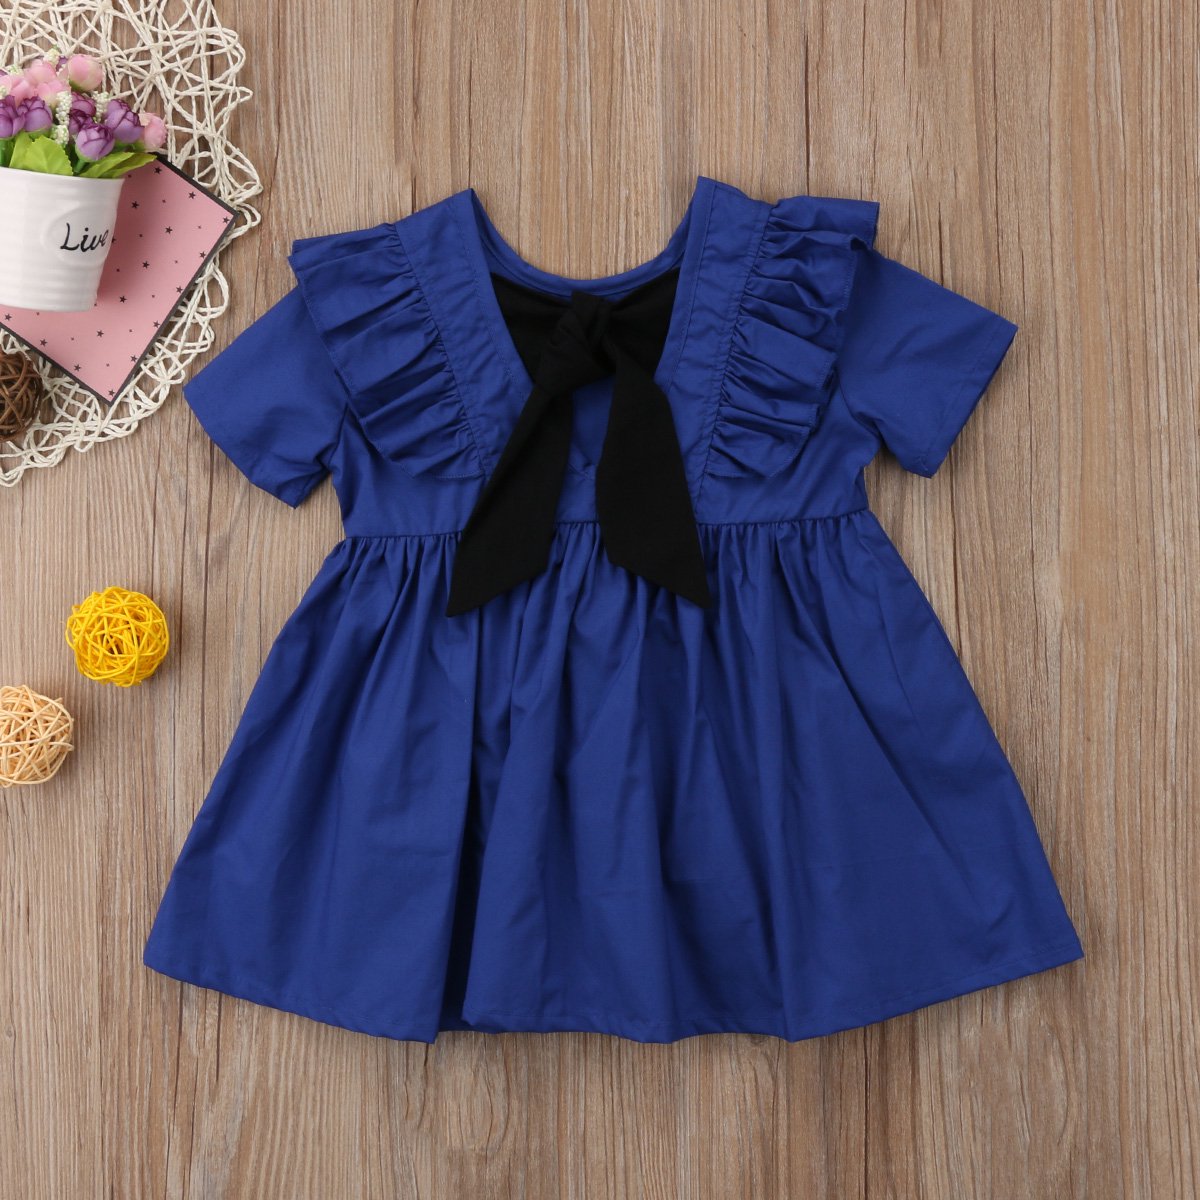 New Baby Girl Frock, Design, Size - 14 (0-6 Months) (G-23/K) (Blue) :  Amazon.in: Clothing & Accessories